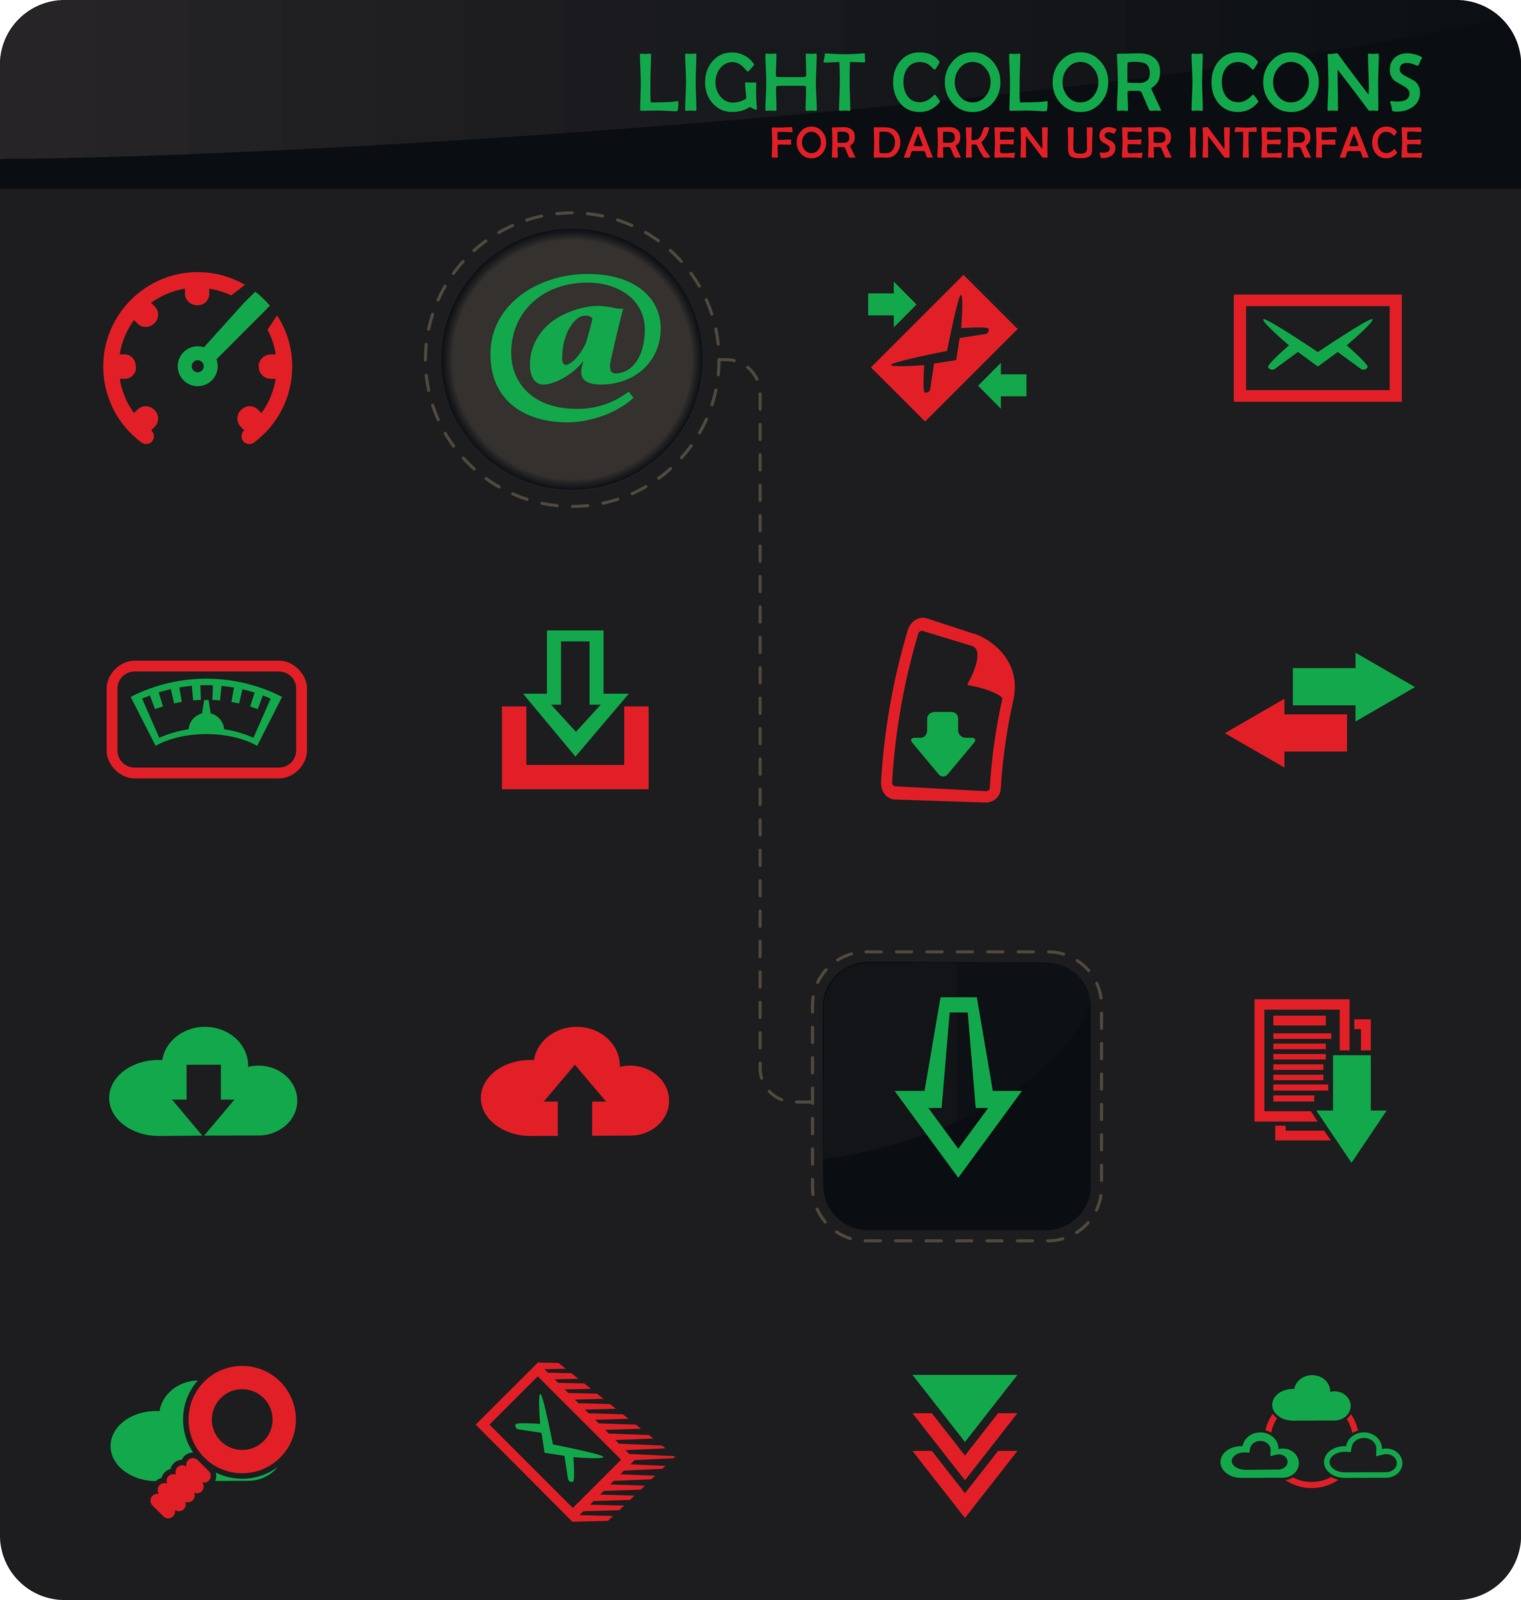 Download easy color vector icons on darken background for user interface design